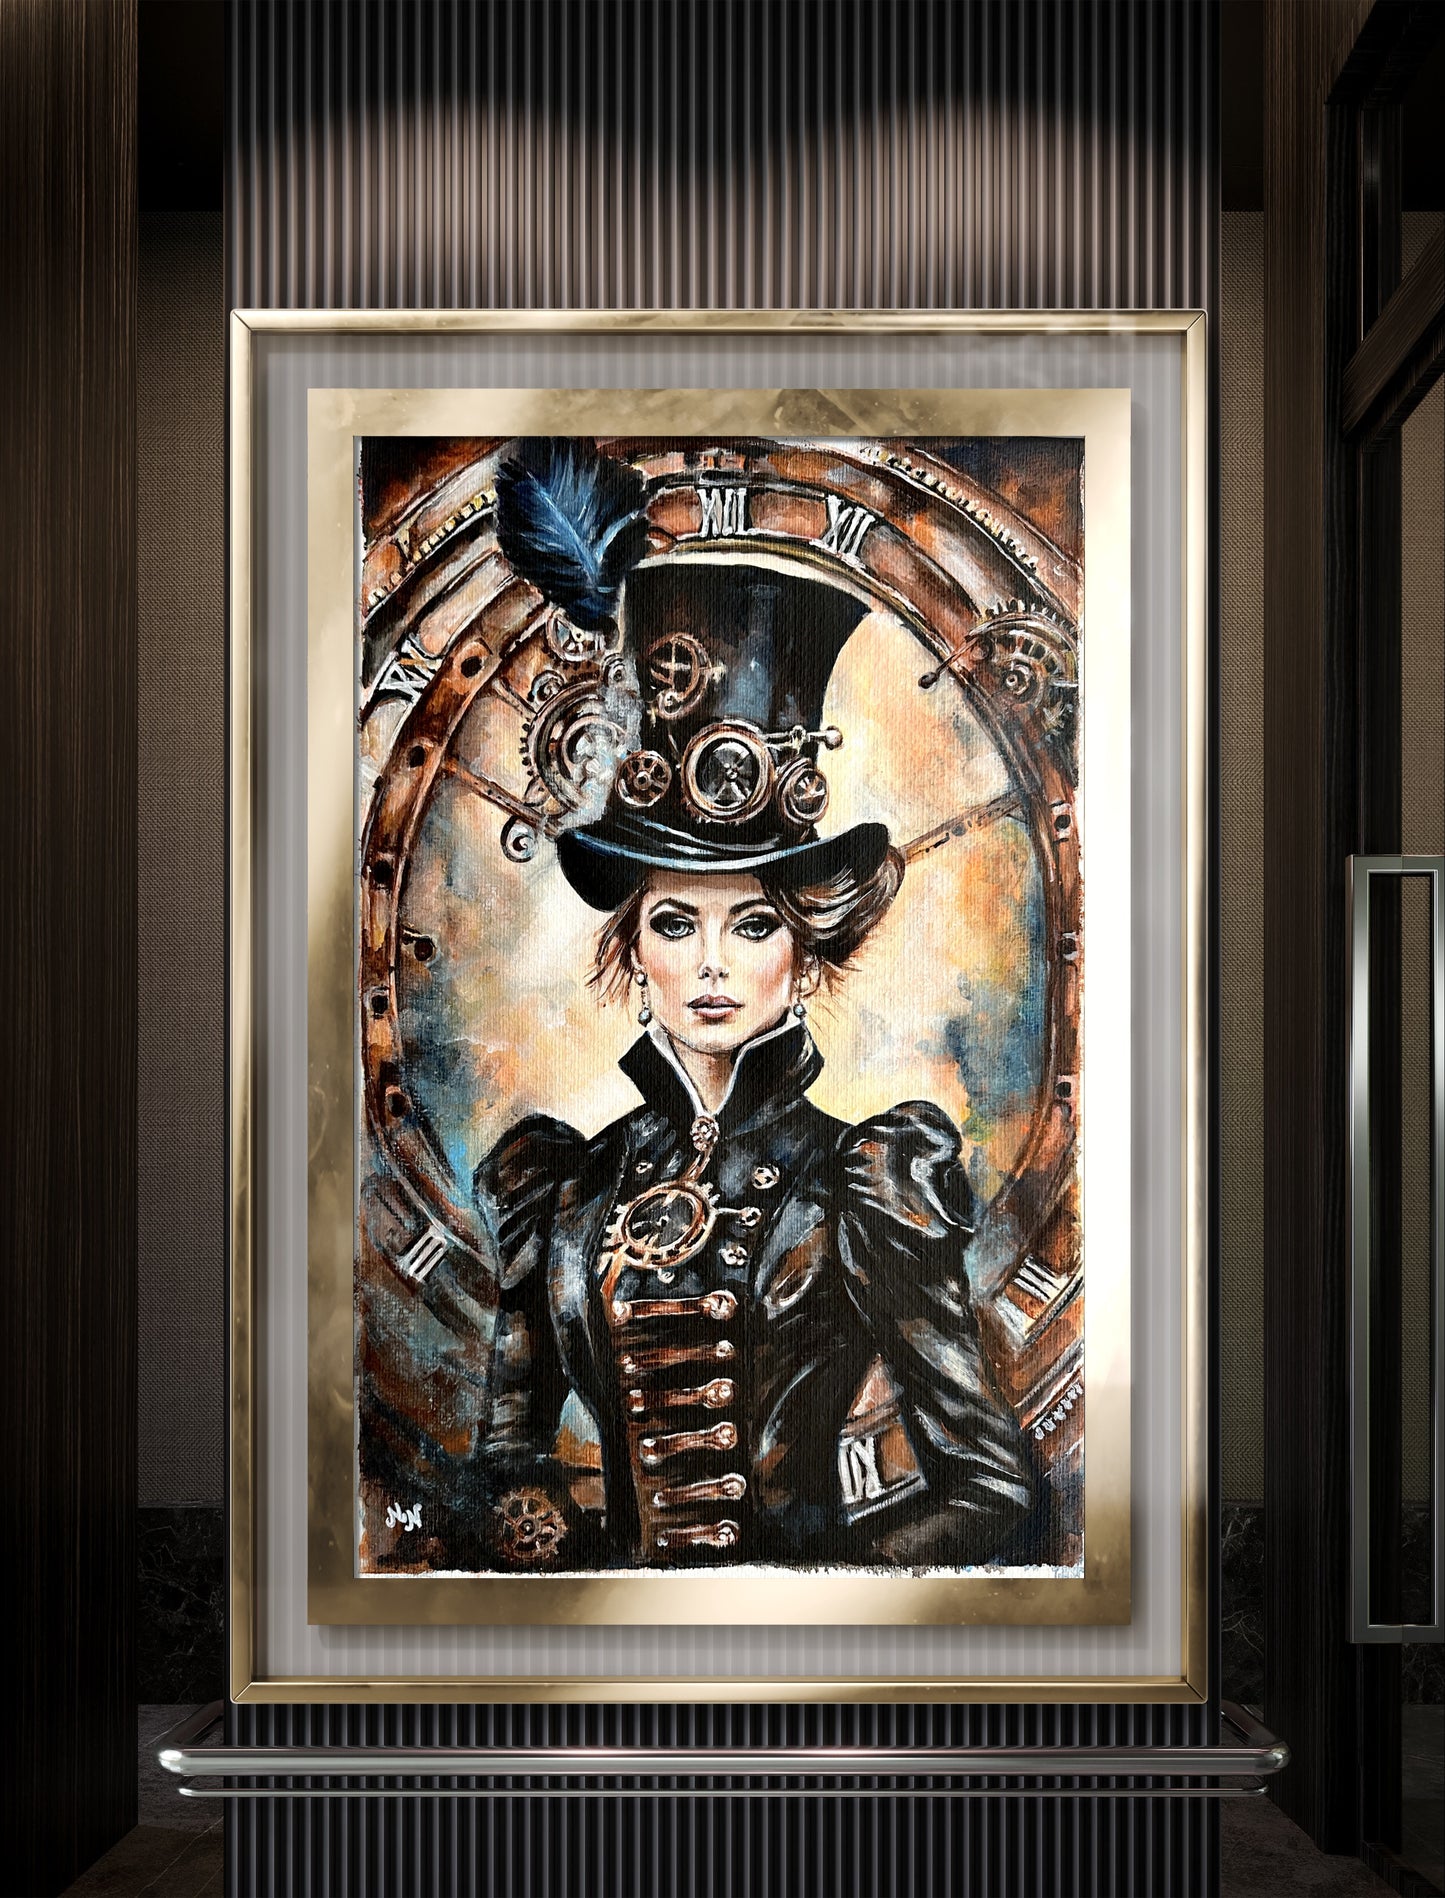 Steampunk Lady: Immersive experience of history and imagination through art.